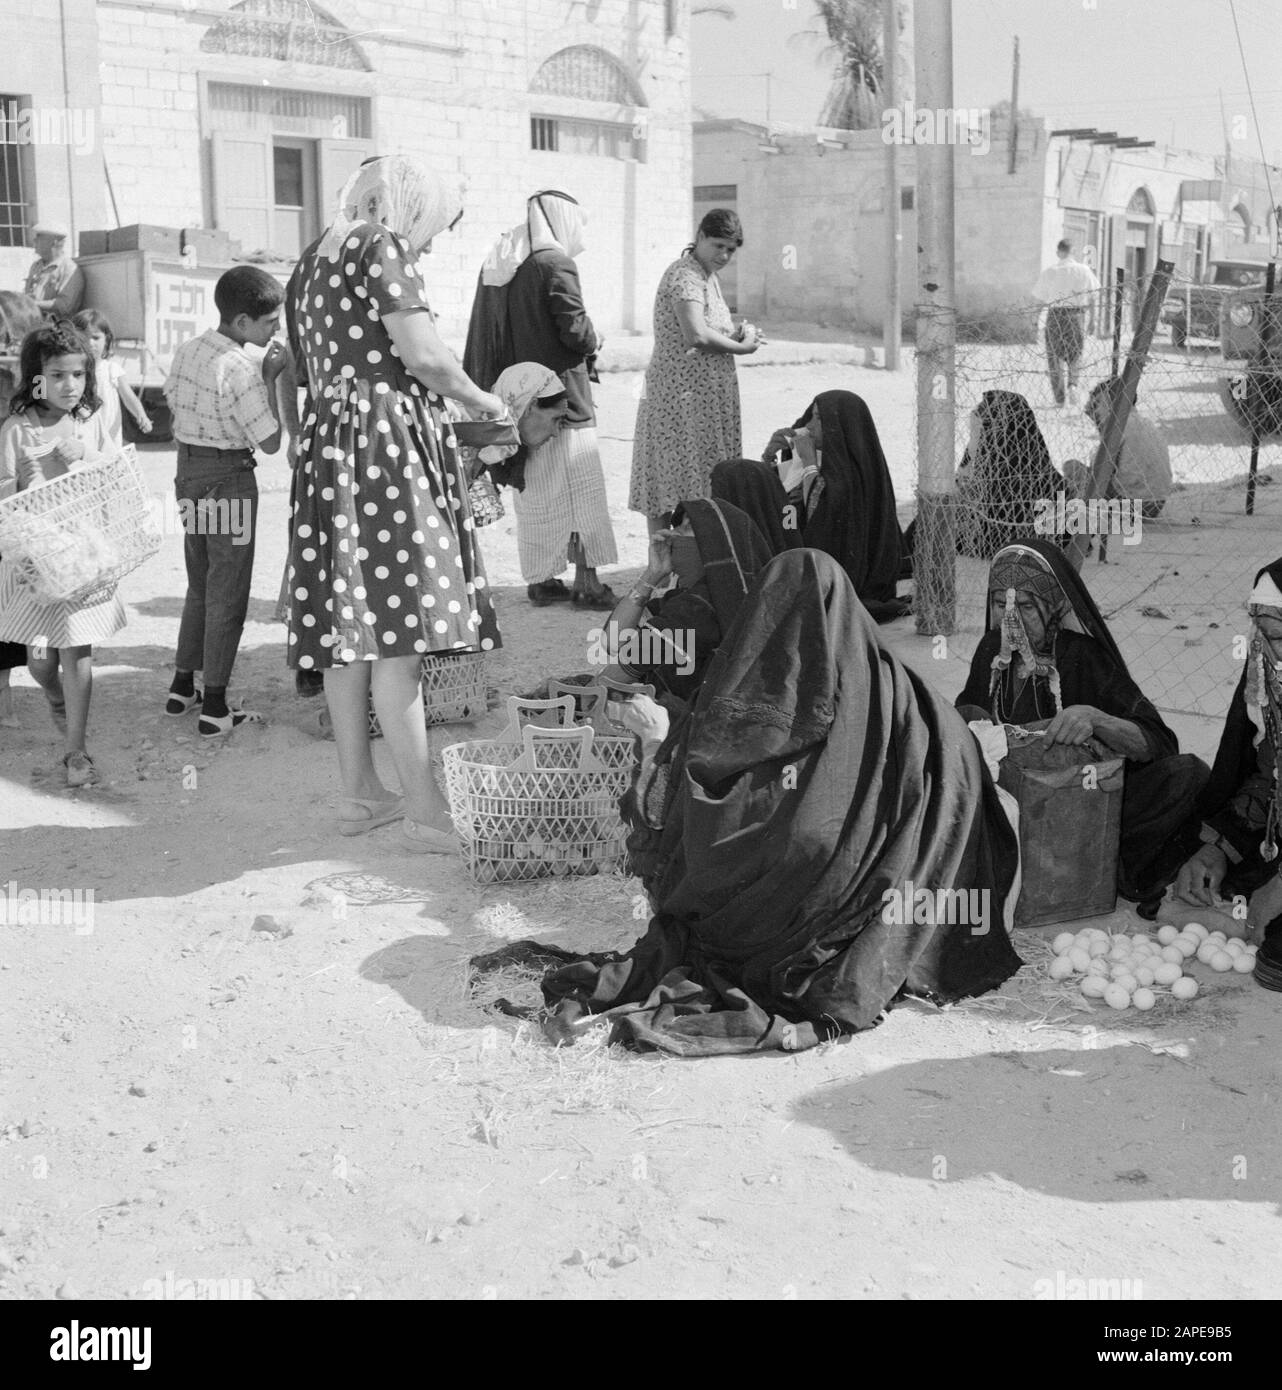 Israel 1960-1965: Bedouin in Beersewa (Beer Sheva) Description: Bedouin women in traditional costume on the market while offering eggs for sale. A customer pays her purchase Date: January 1, 1960 Location: Bersheba, Israel Keywords: Bedouin, Eggs, trade, markets, street images Stock Photo